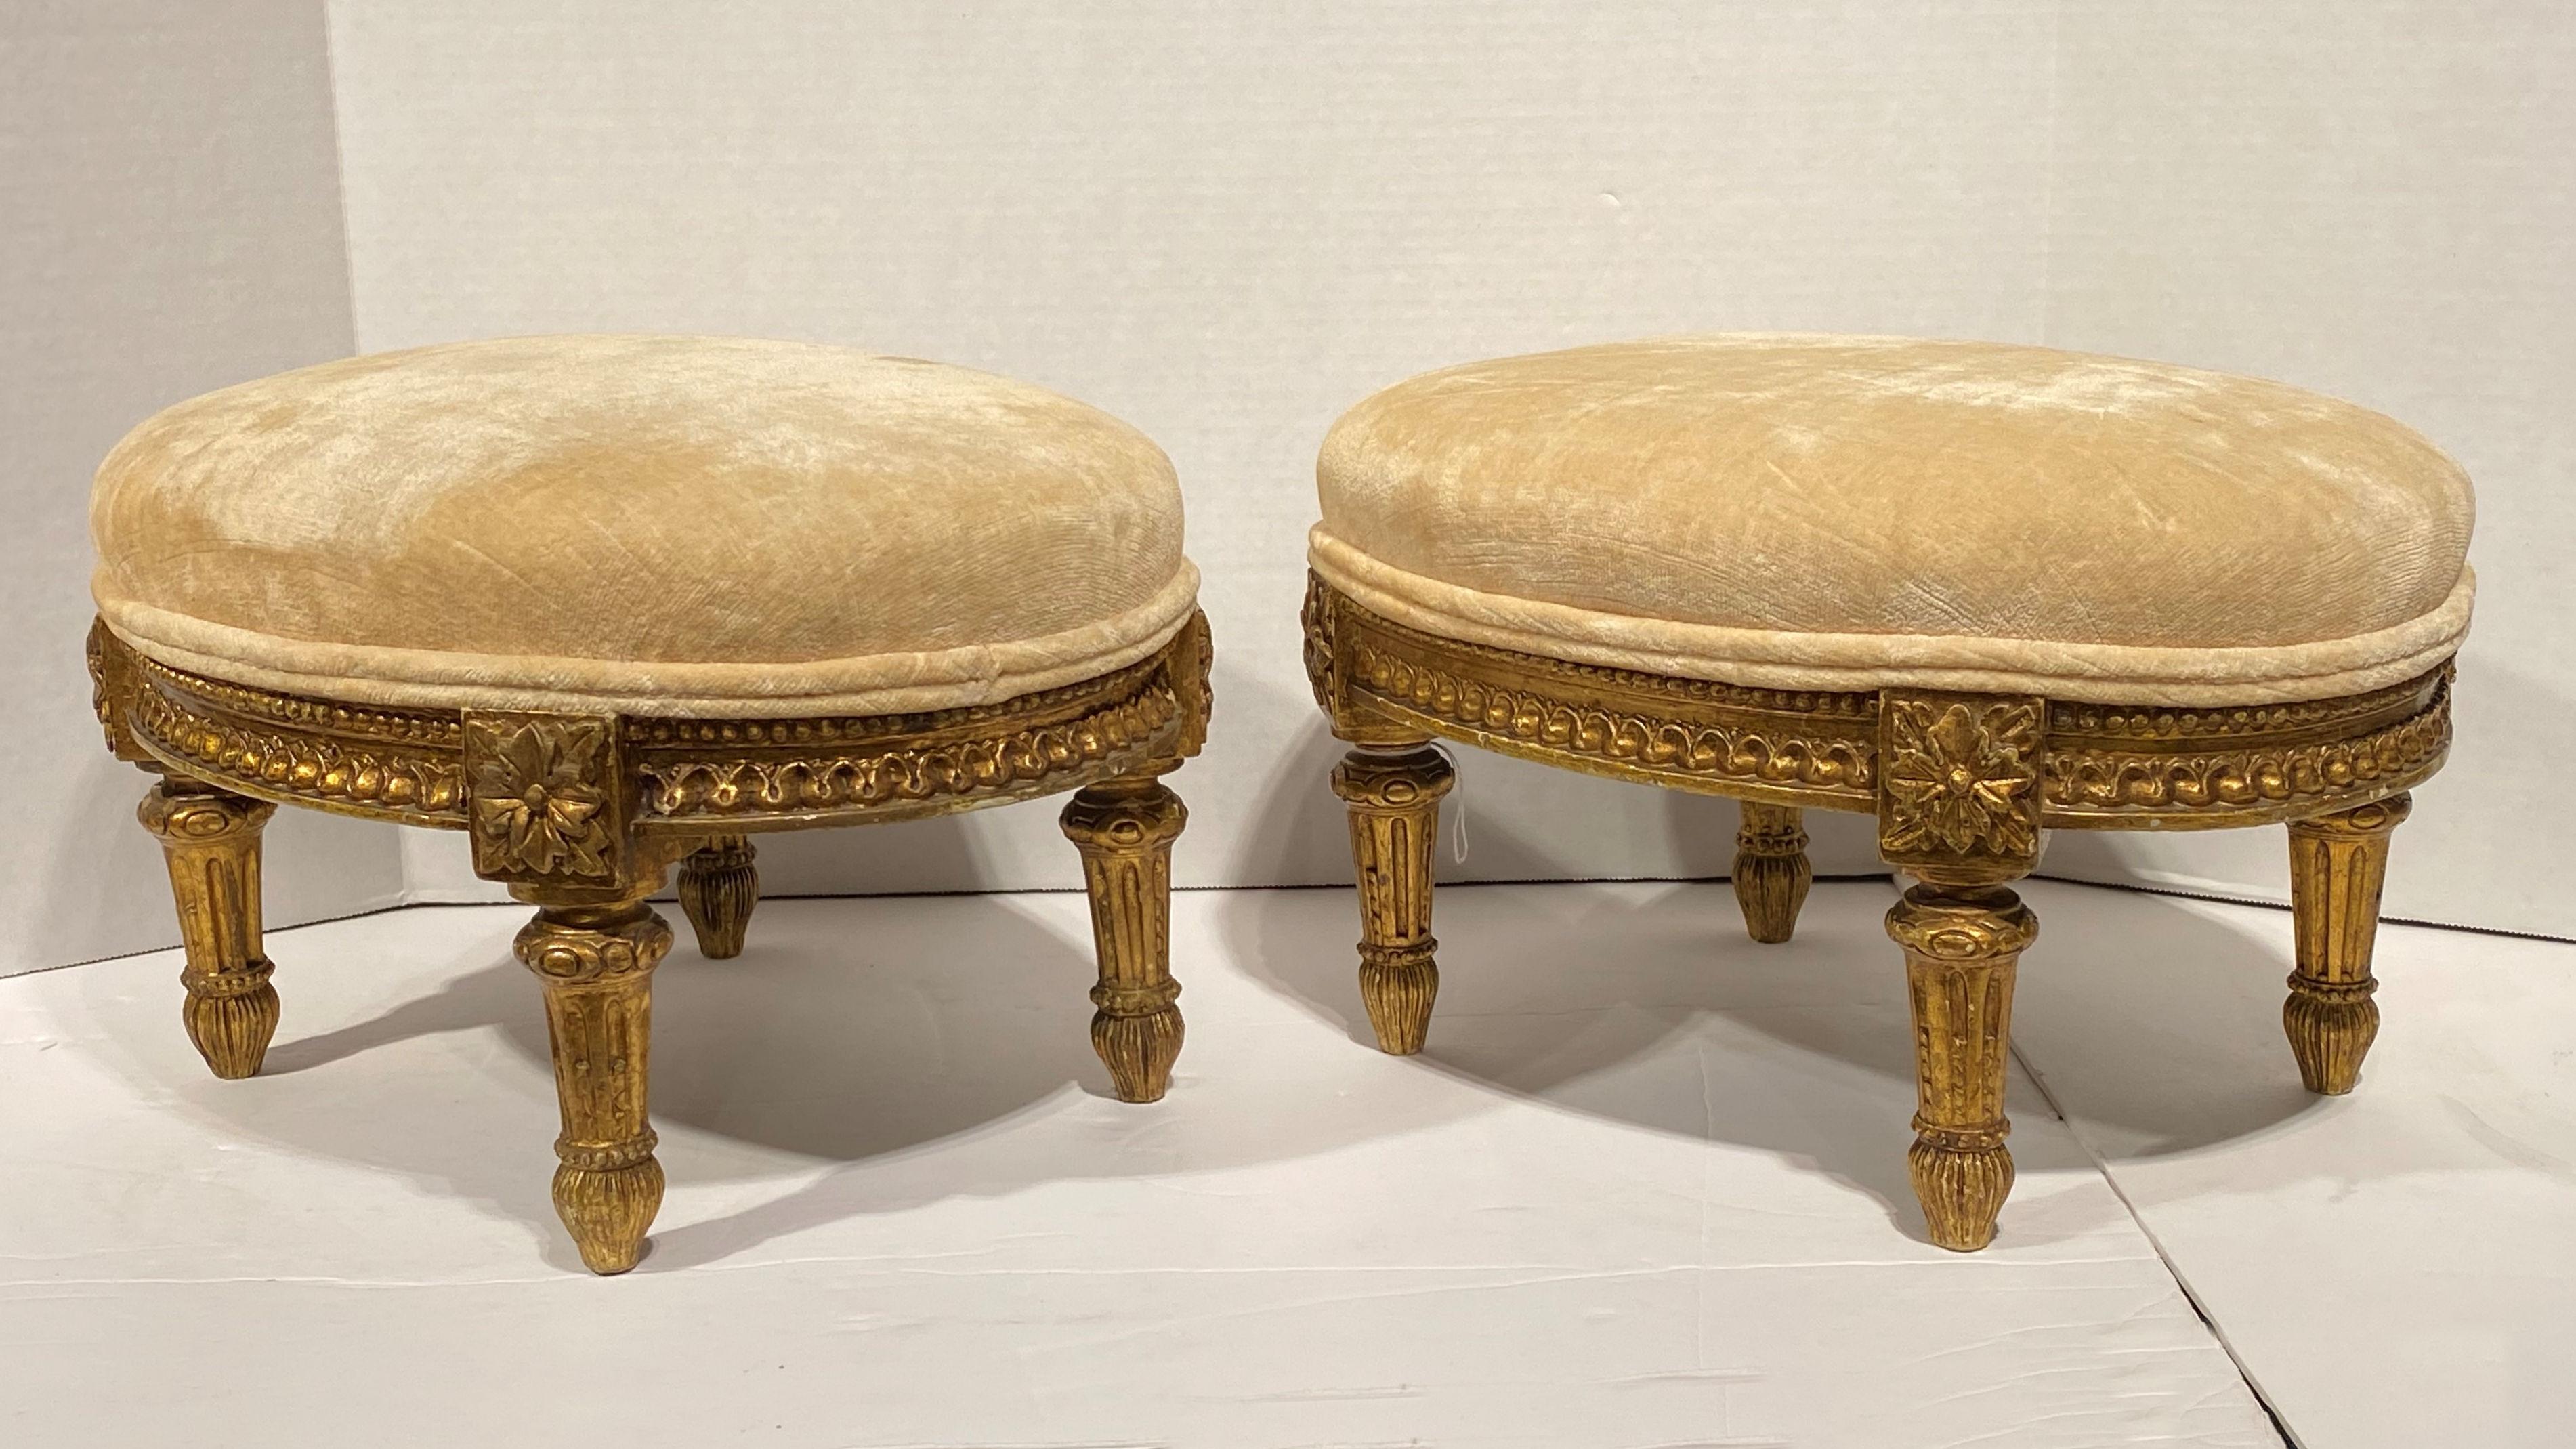 Pair of French 19th century Louis XVI style giltwood foot stools.